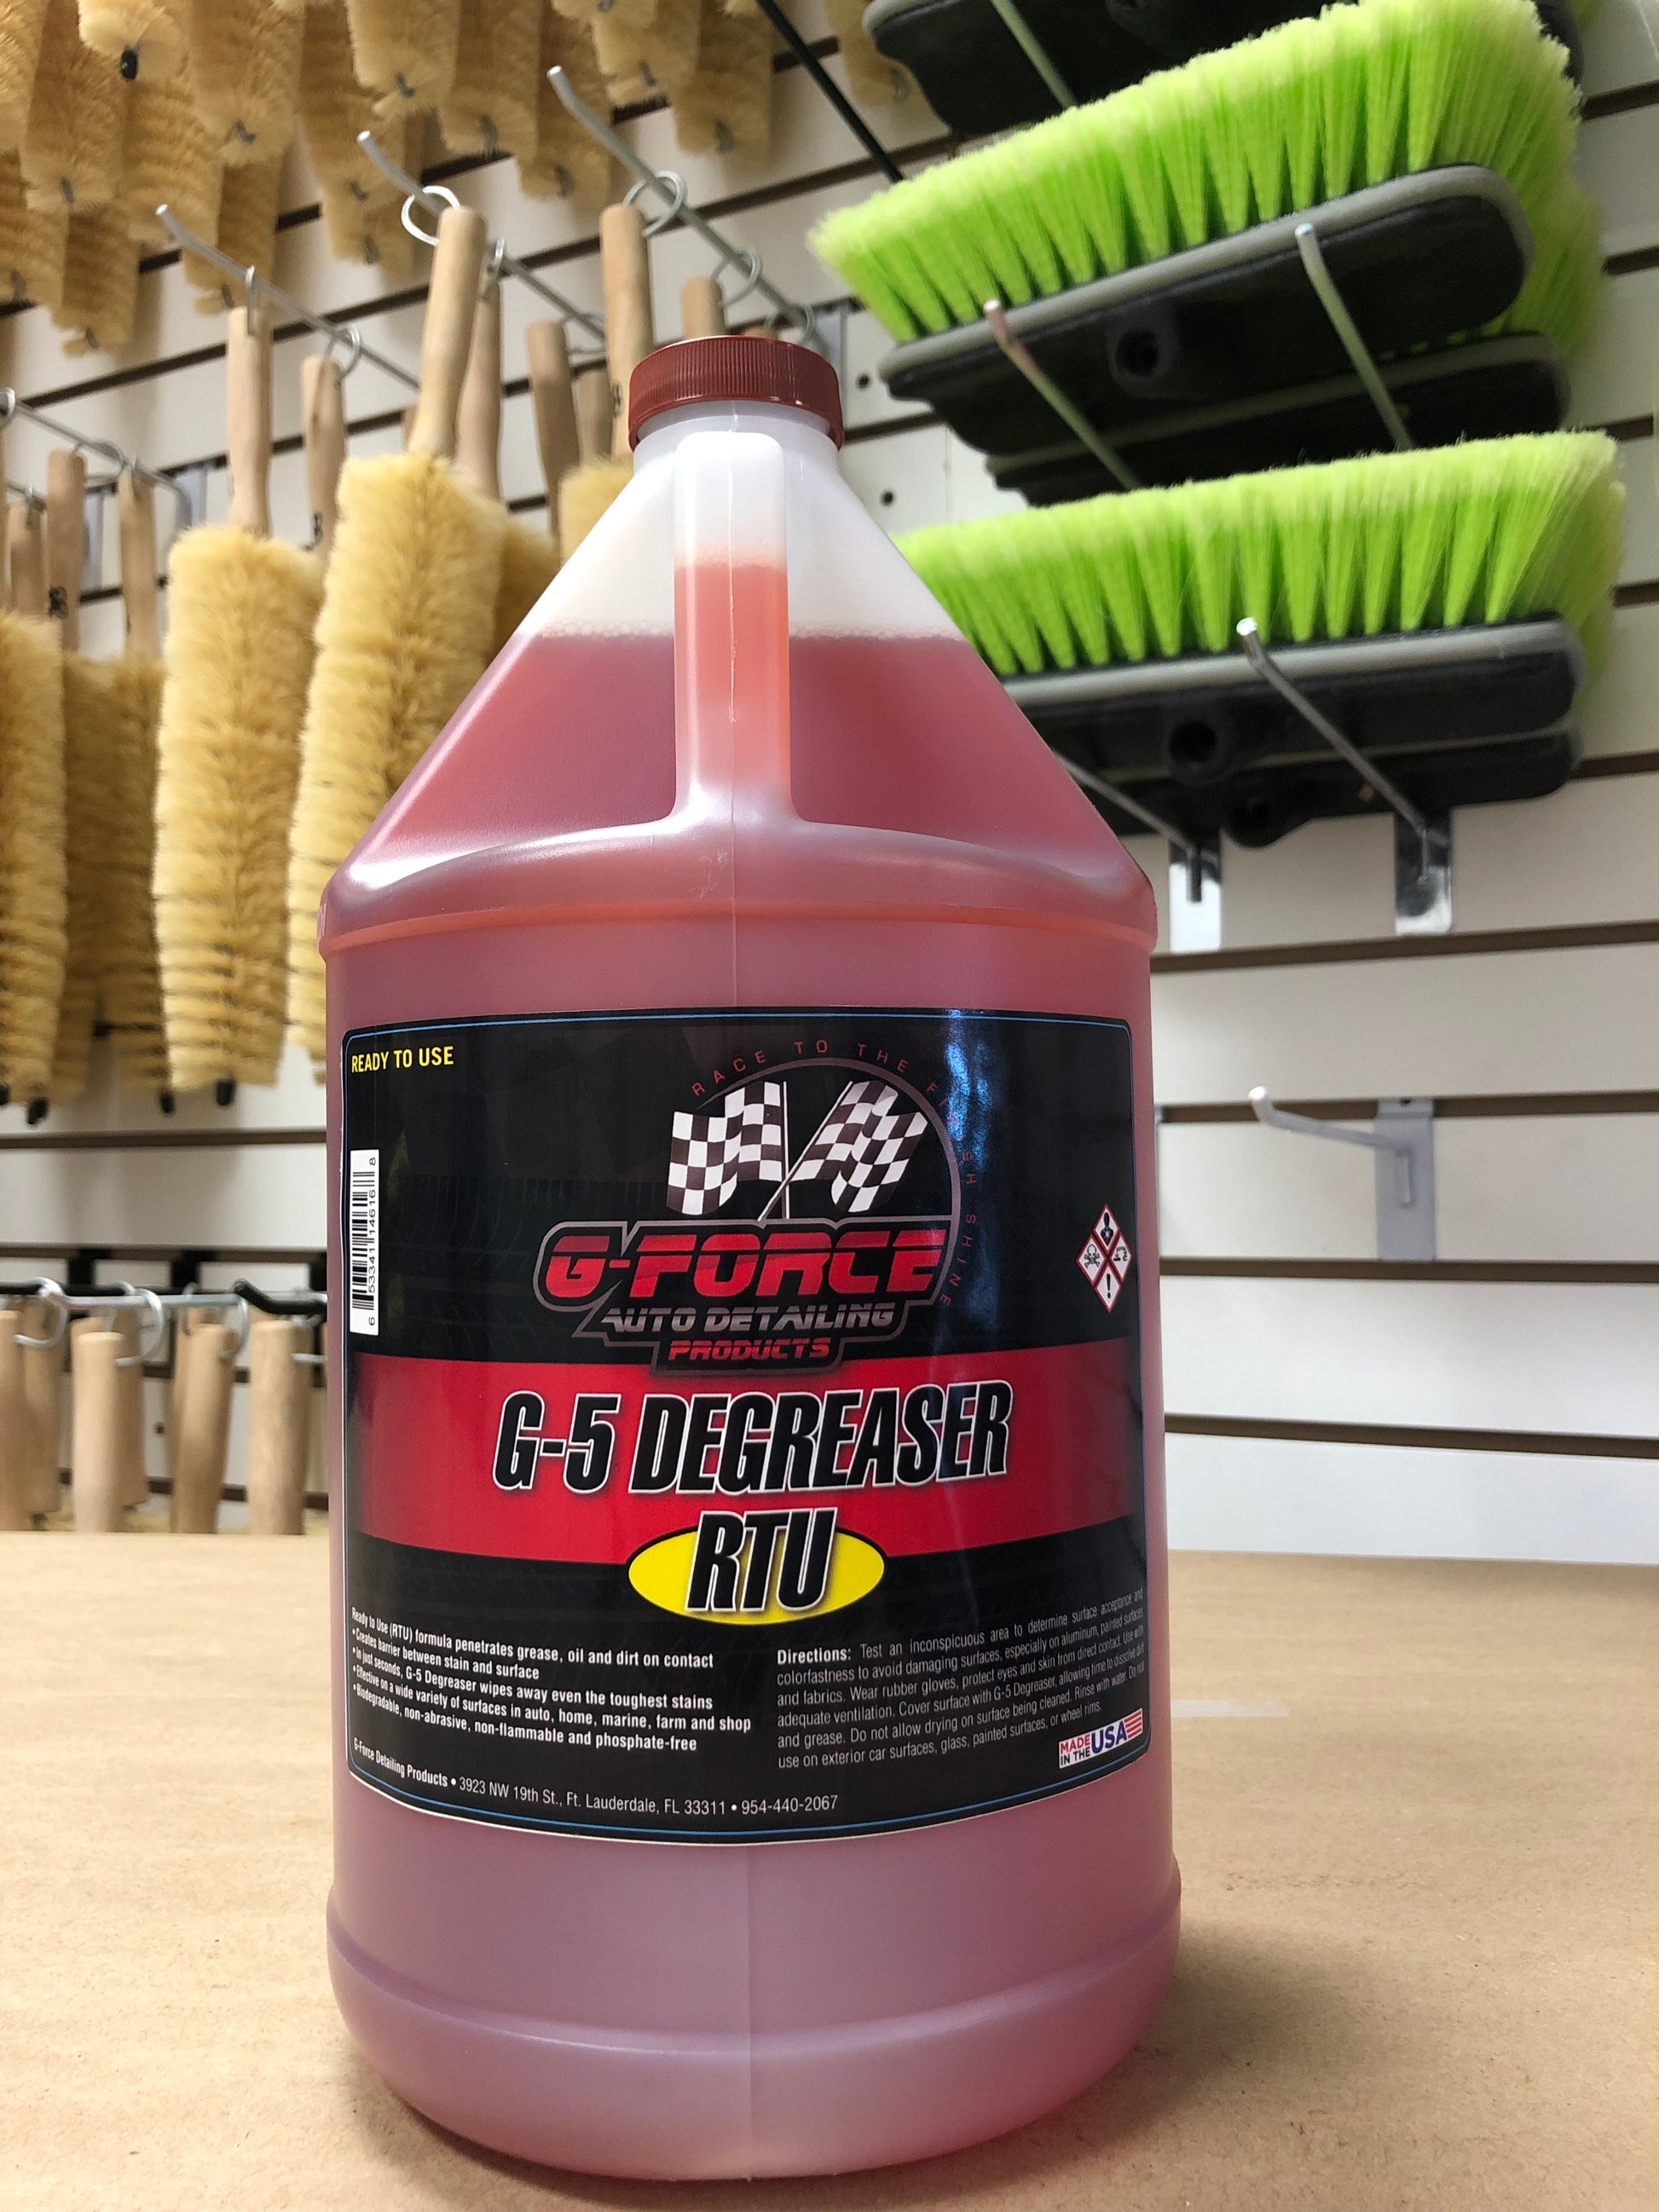 G-5 Degreaser RTU – G Force Auto Detailing Products